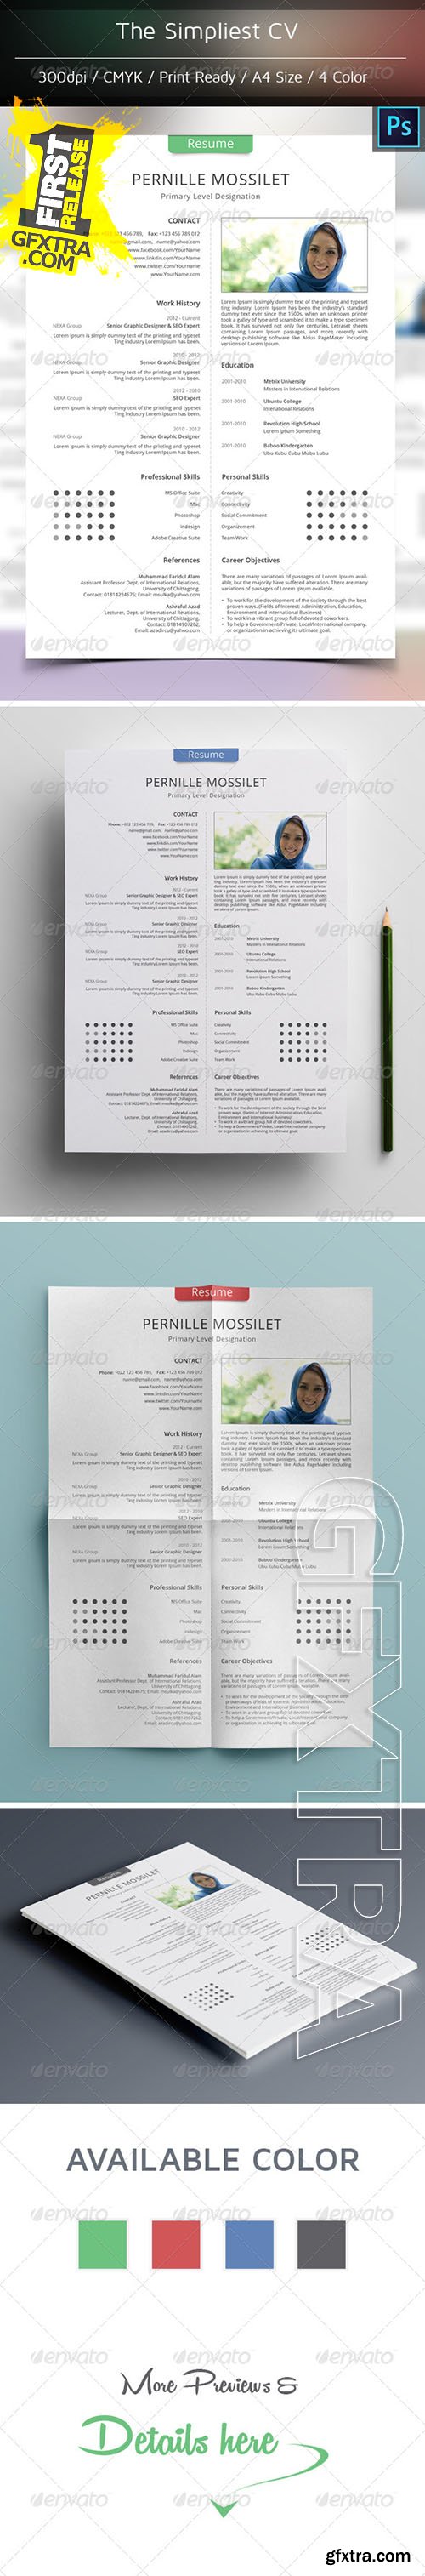 Graphicriver - The Simplest CV 8541920